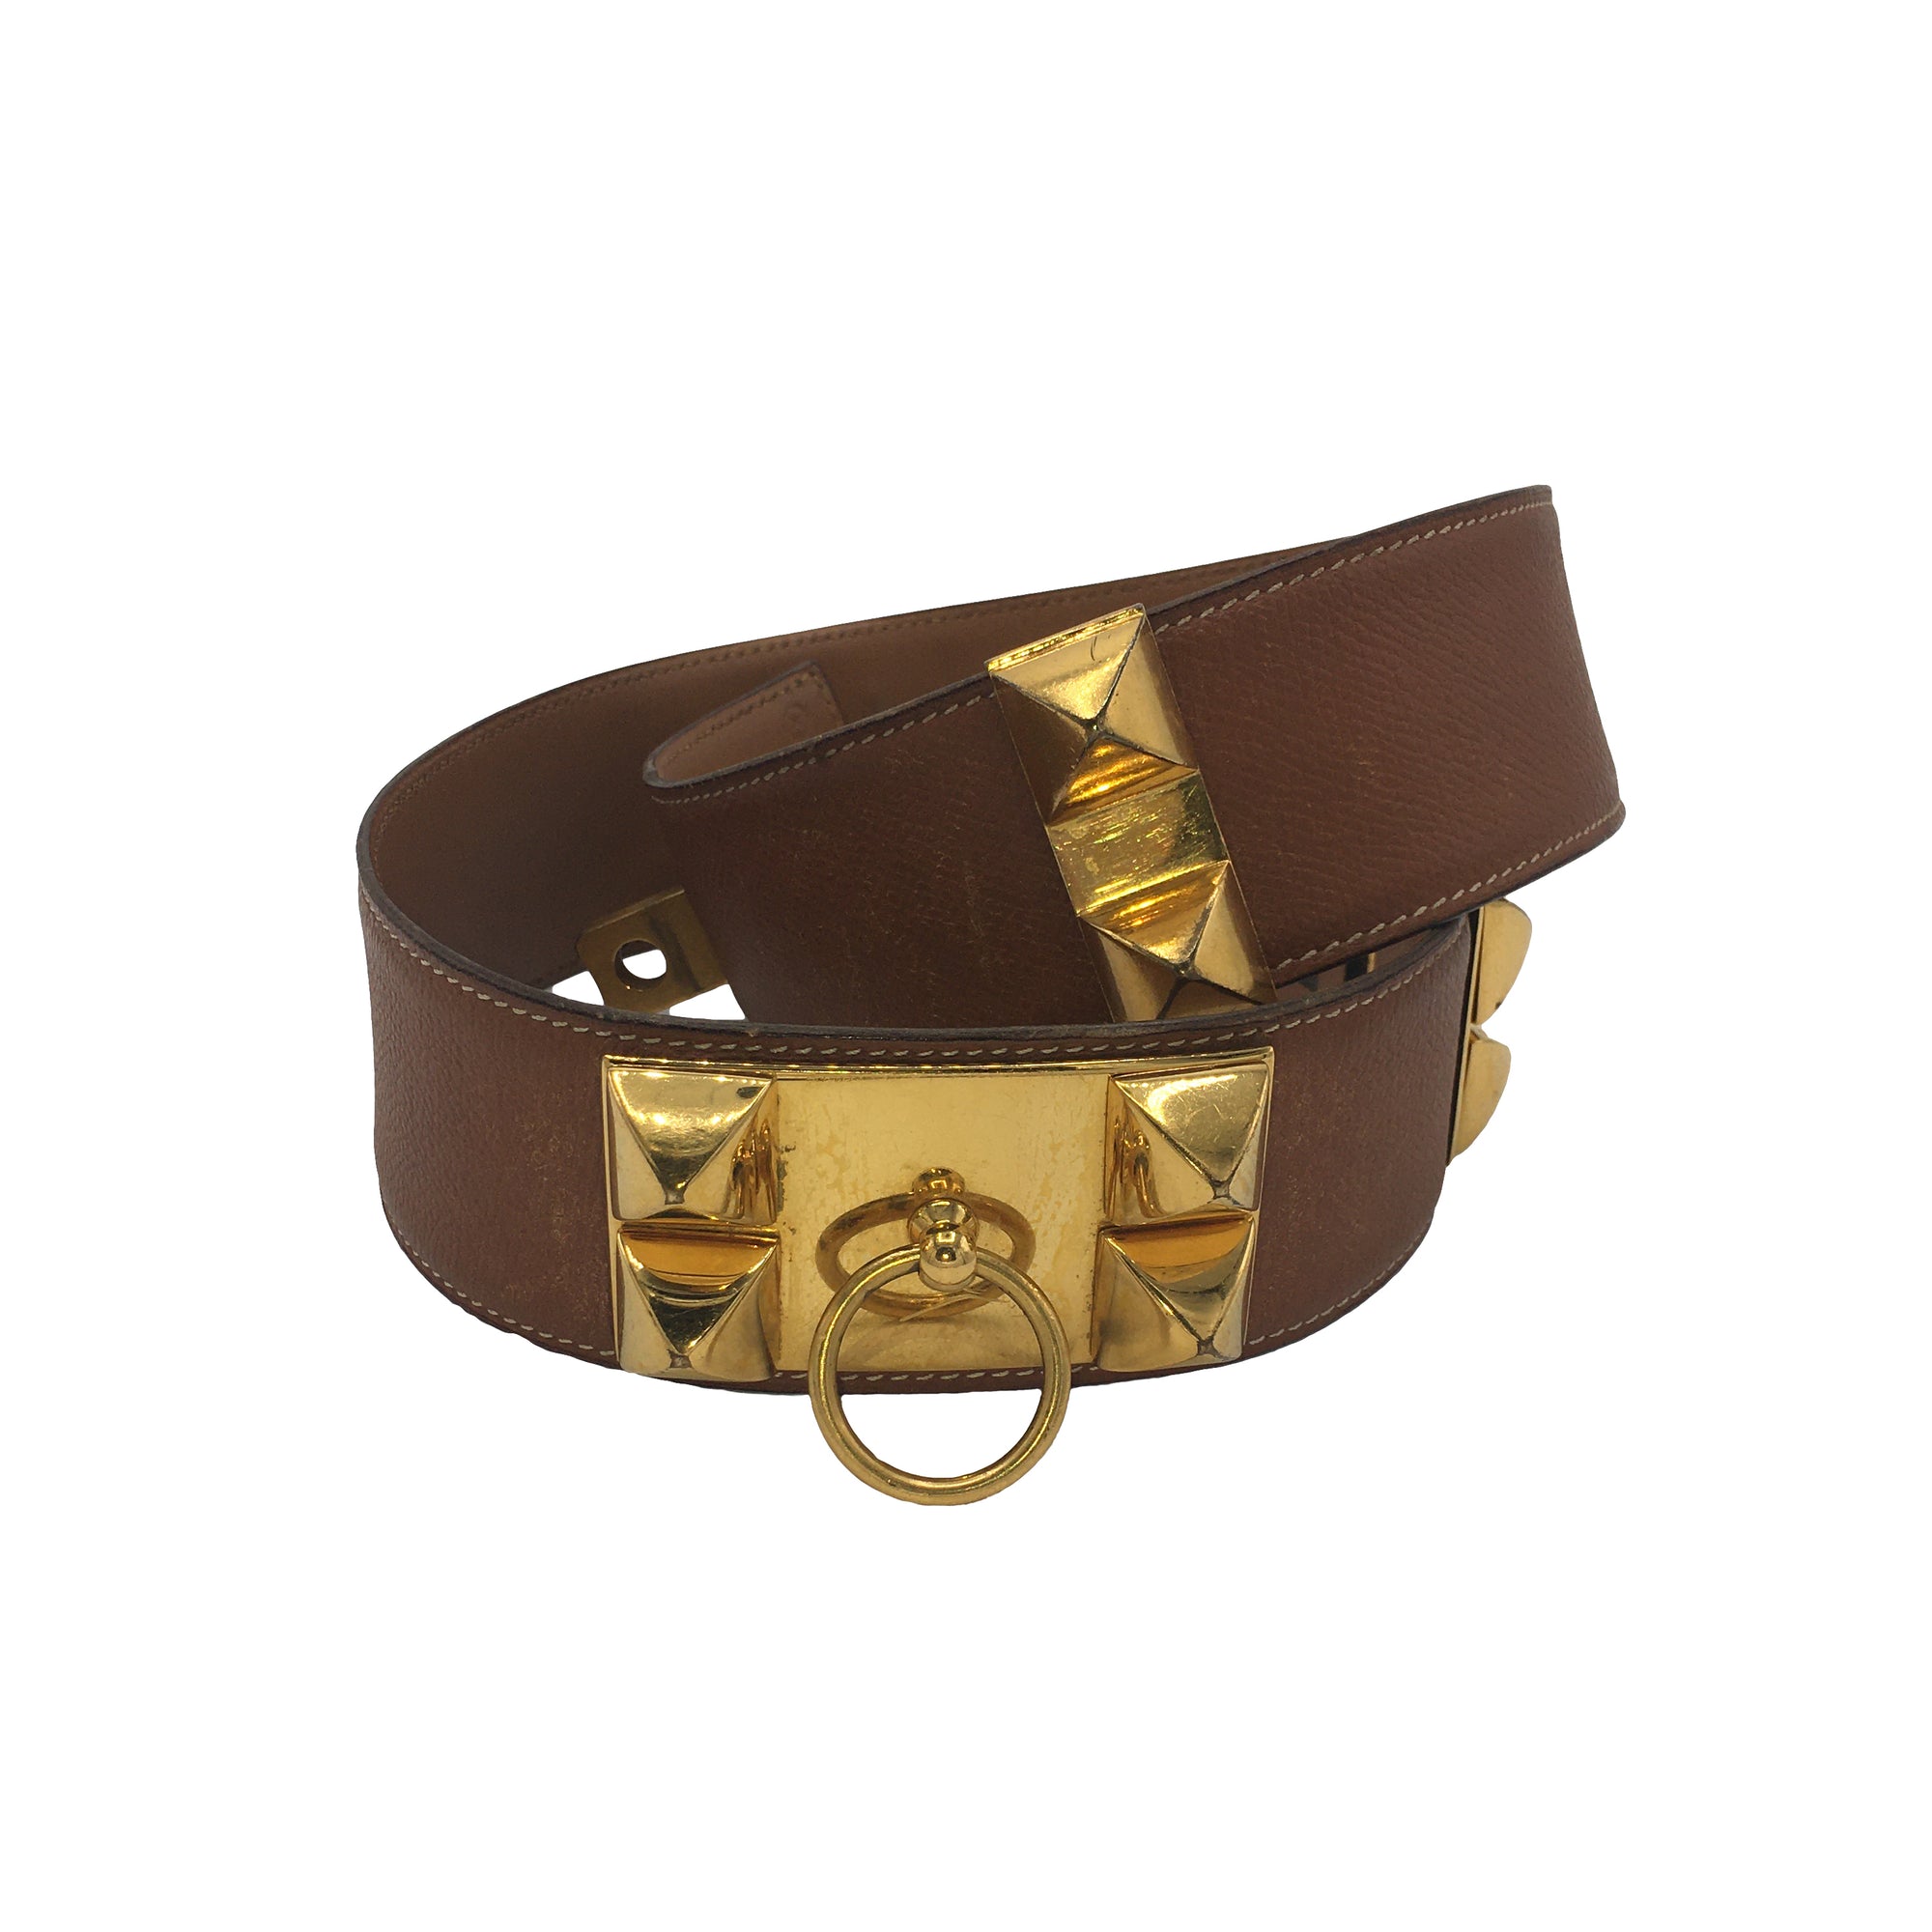 Find the Style at a Price You Can't Beat with Our Collection of Hermes  Epsom Leather Kelly Dog Collar w/ Box Hermes